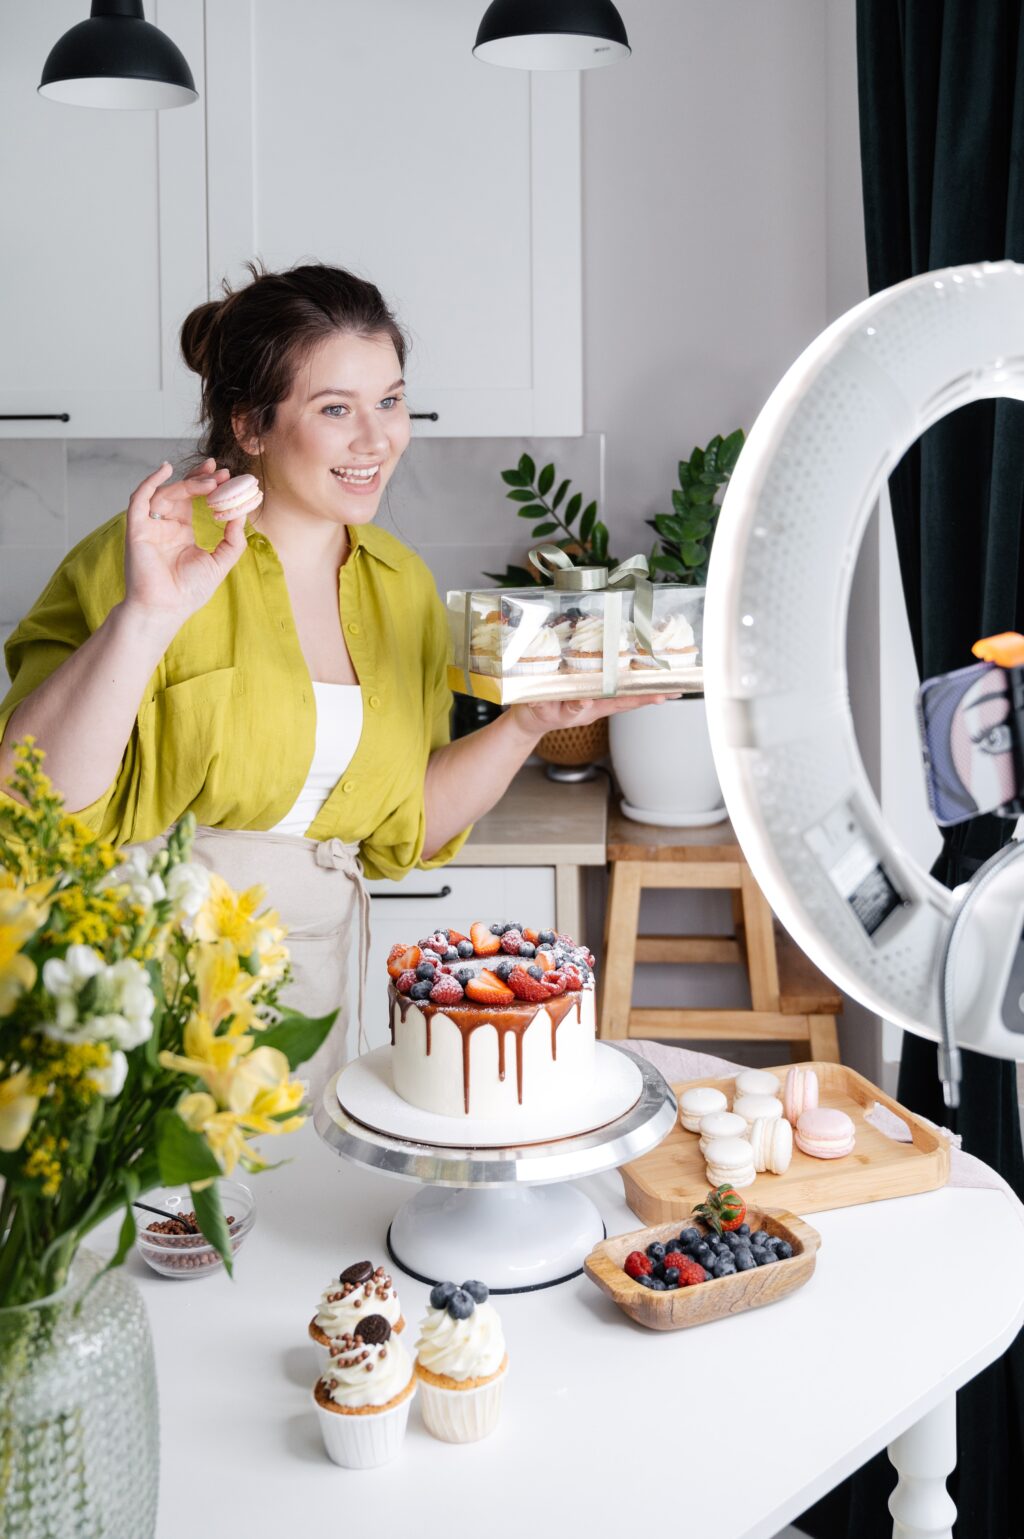 10 Reasons To Create Short Form Video To Market Your Wedding Business